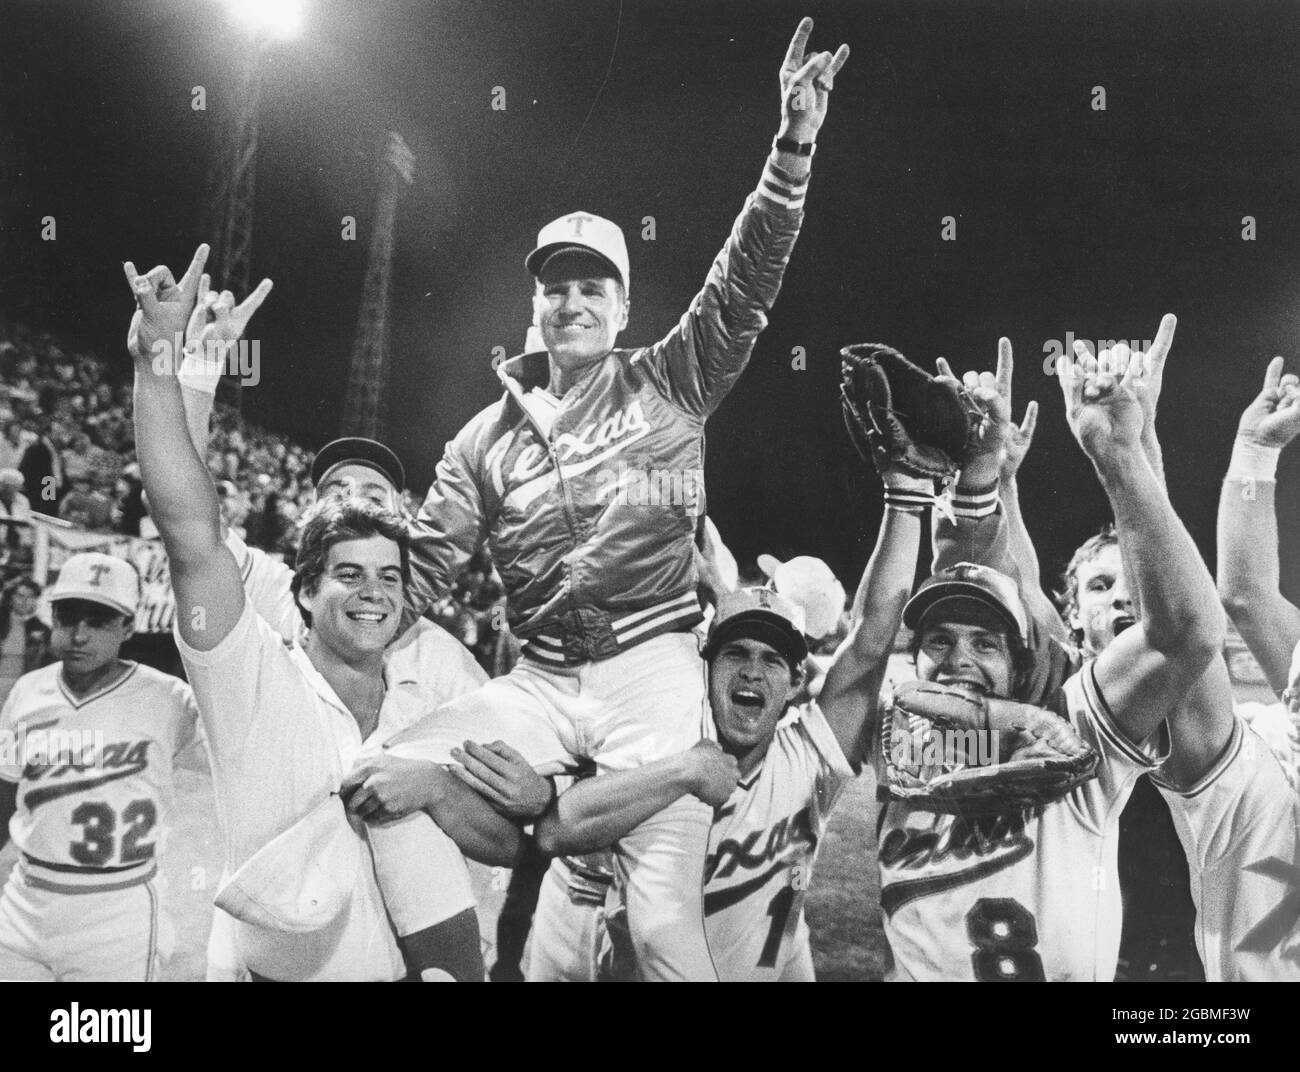 Omaha, Nebraska, USA, 1984: University of Texas baseball coach Cliff Gustafson is carried off the field by his players after UT won the College World Series national championship. ©Bob Daemmrich Stock Photo